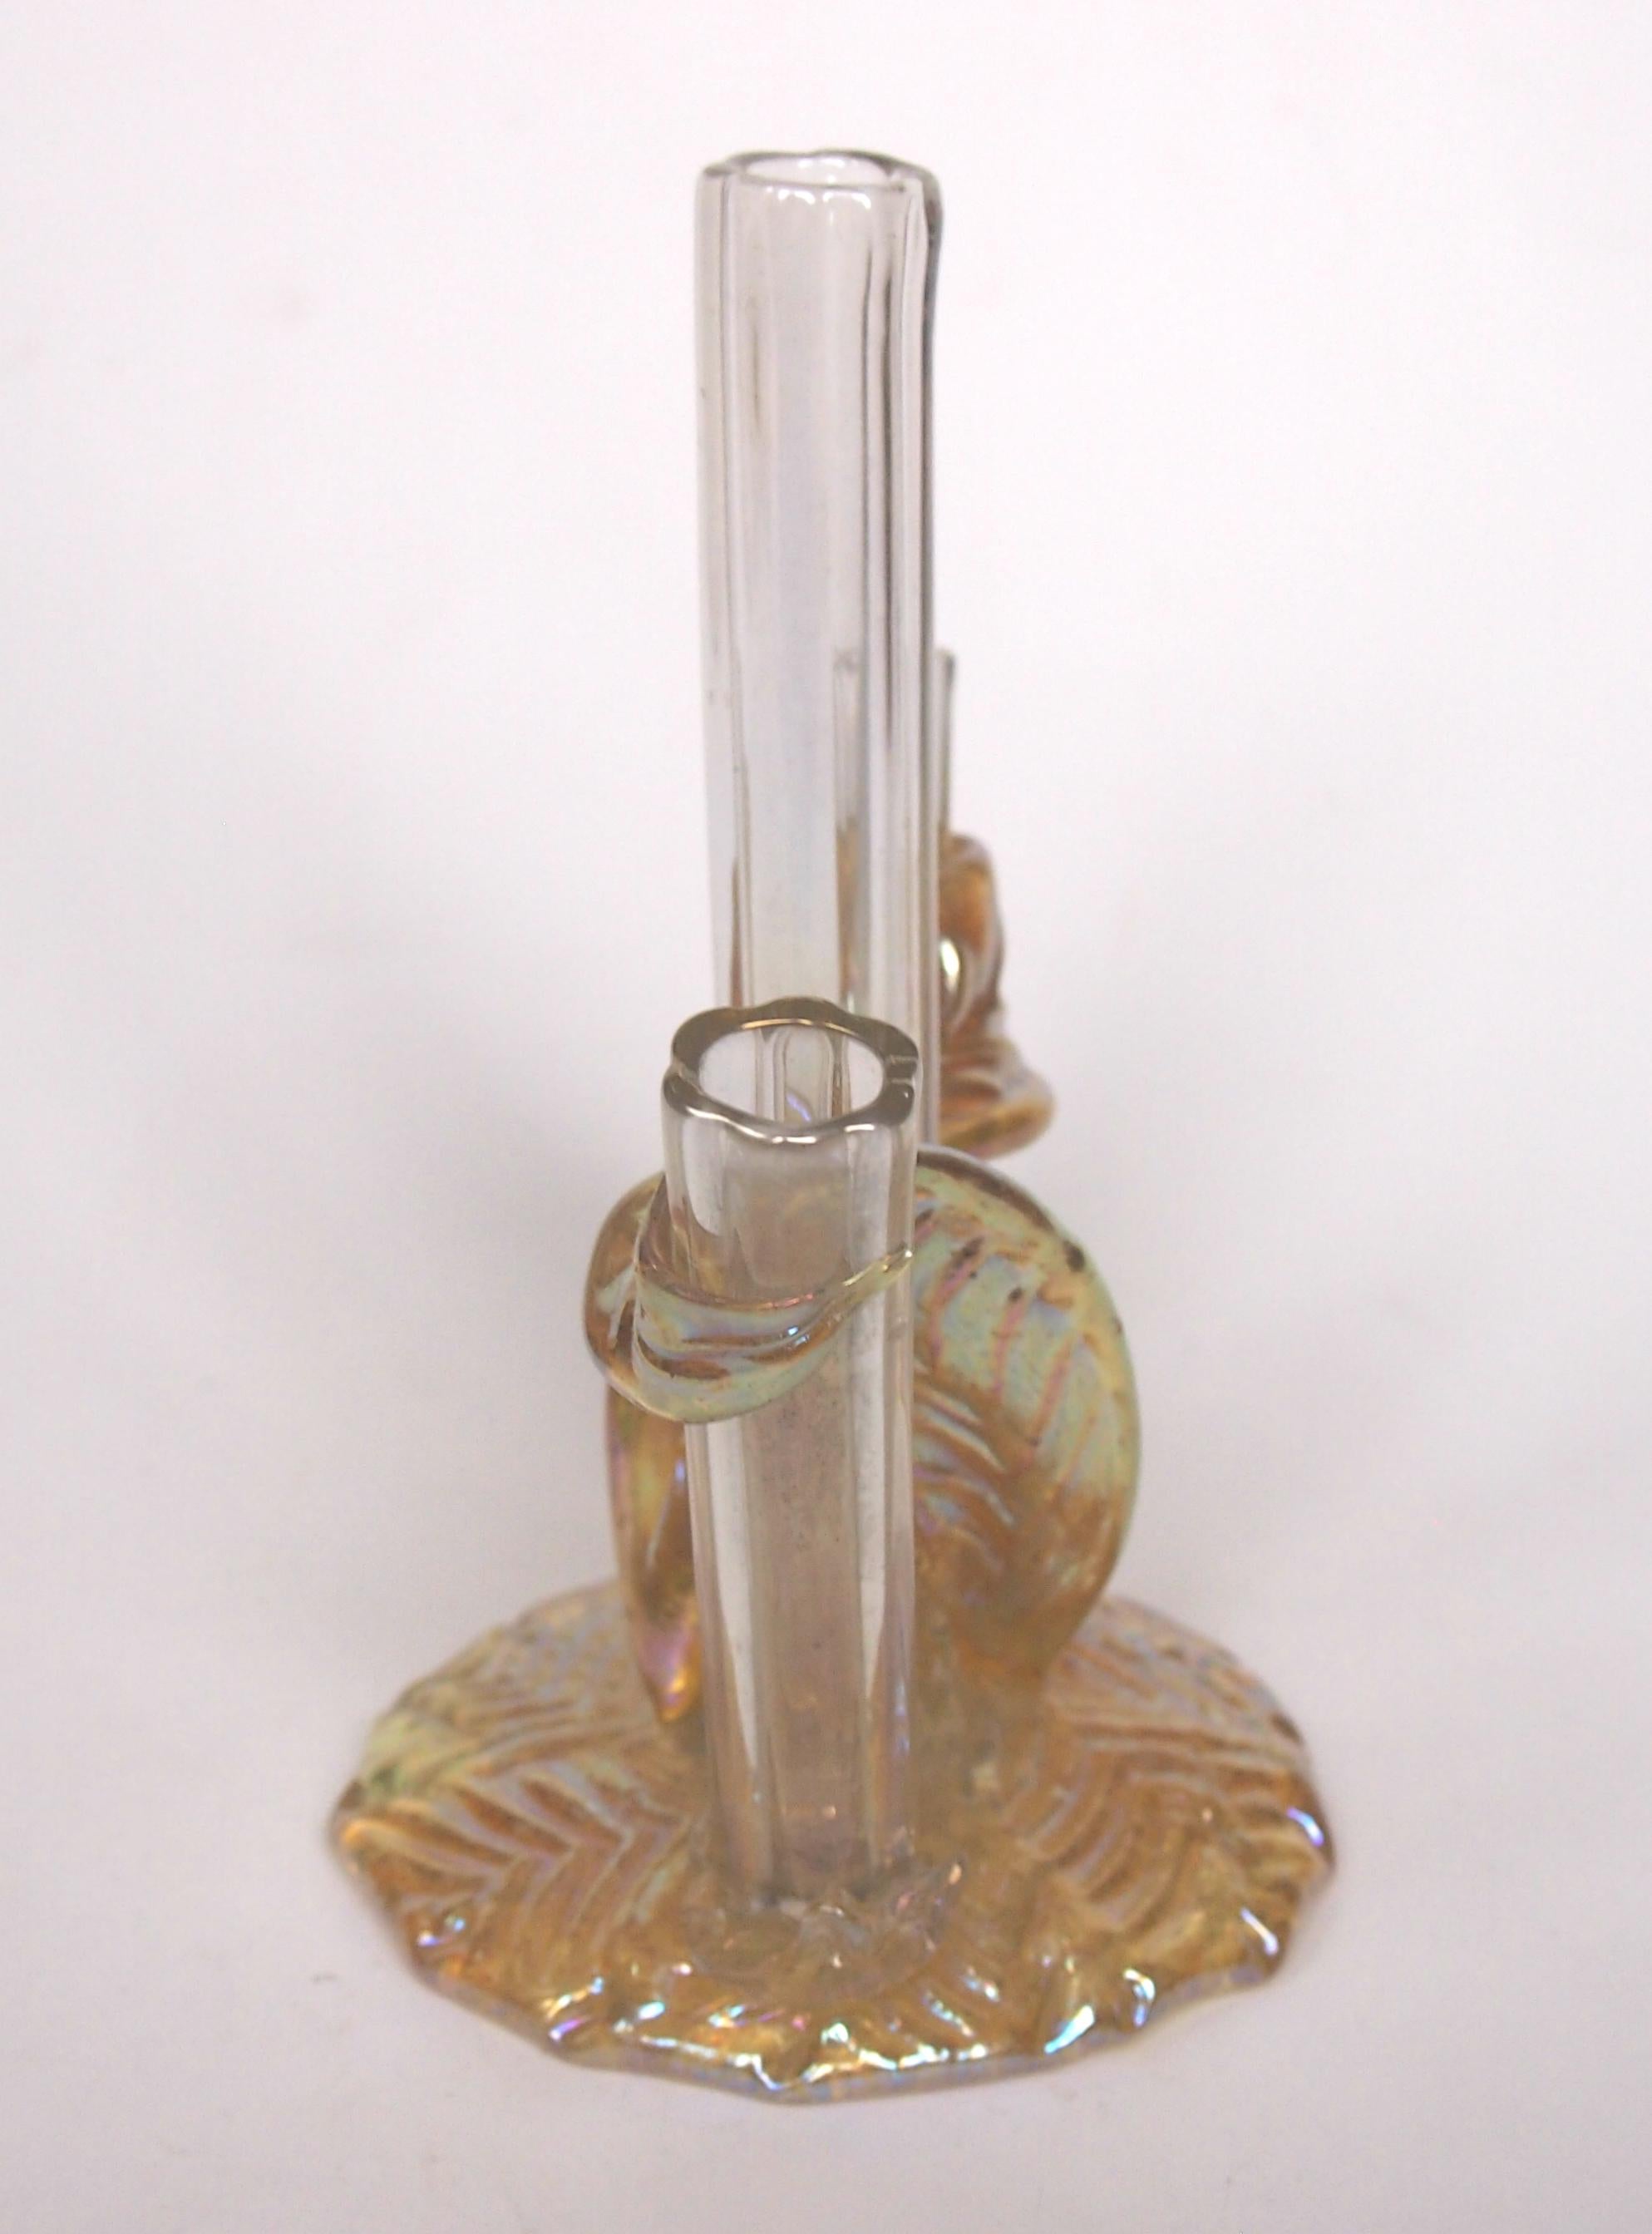 Bohemian Art Nouveau Loetz Glass Stick Vase Made for Max Emanuel in 1910 In Good Condition For Sale In Worcester Park, GB